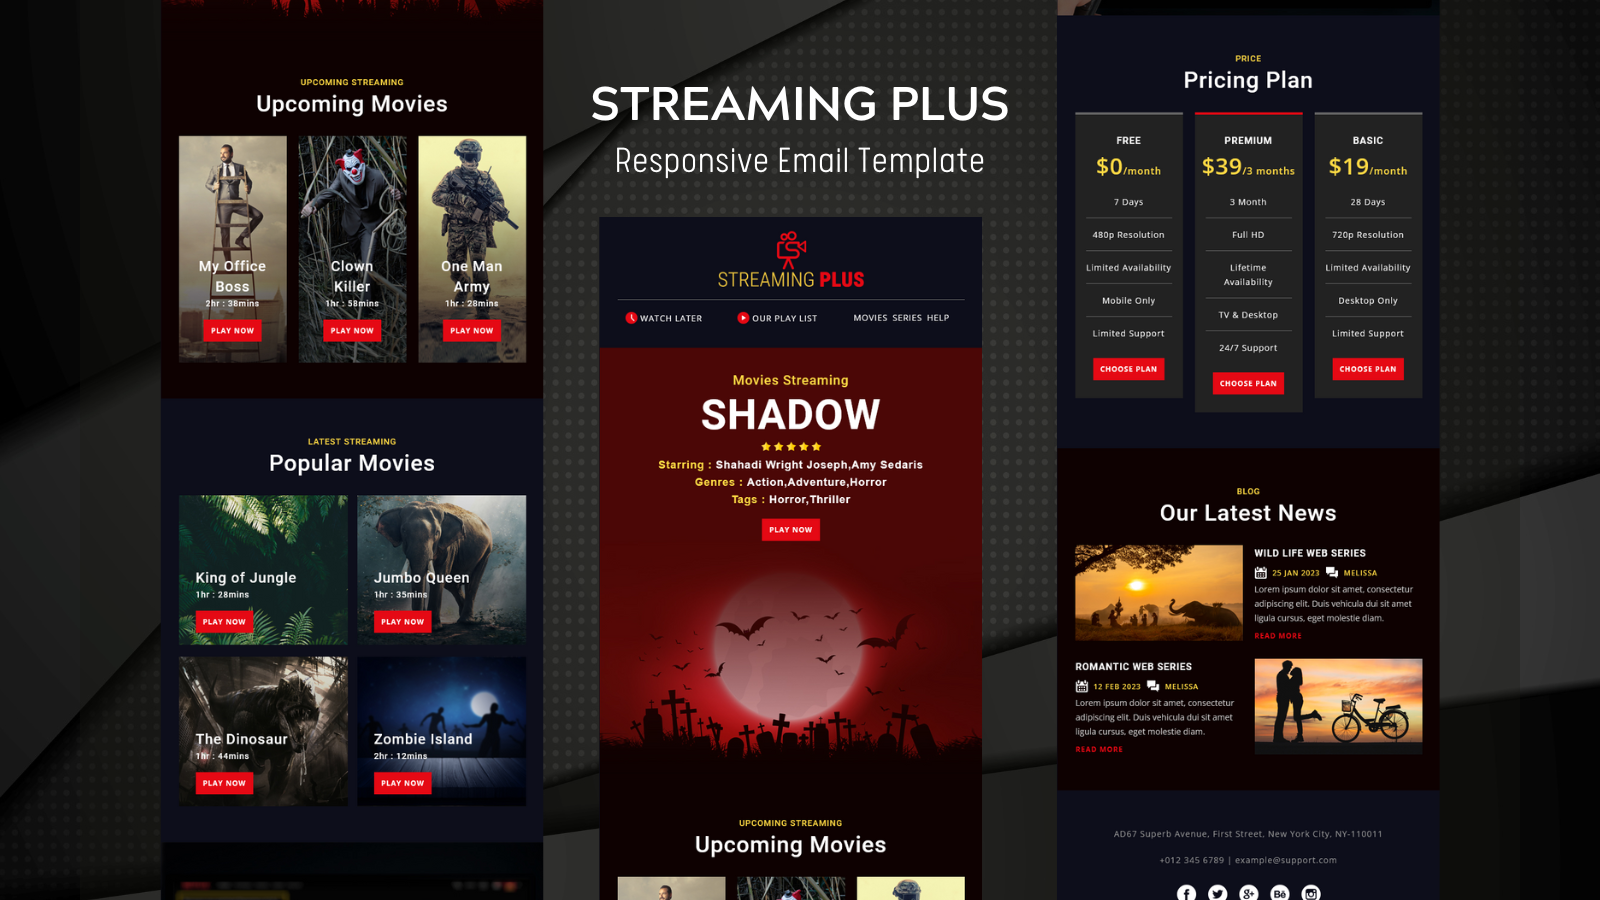 Streaming Plus – Responsive Email Template